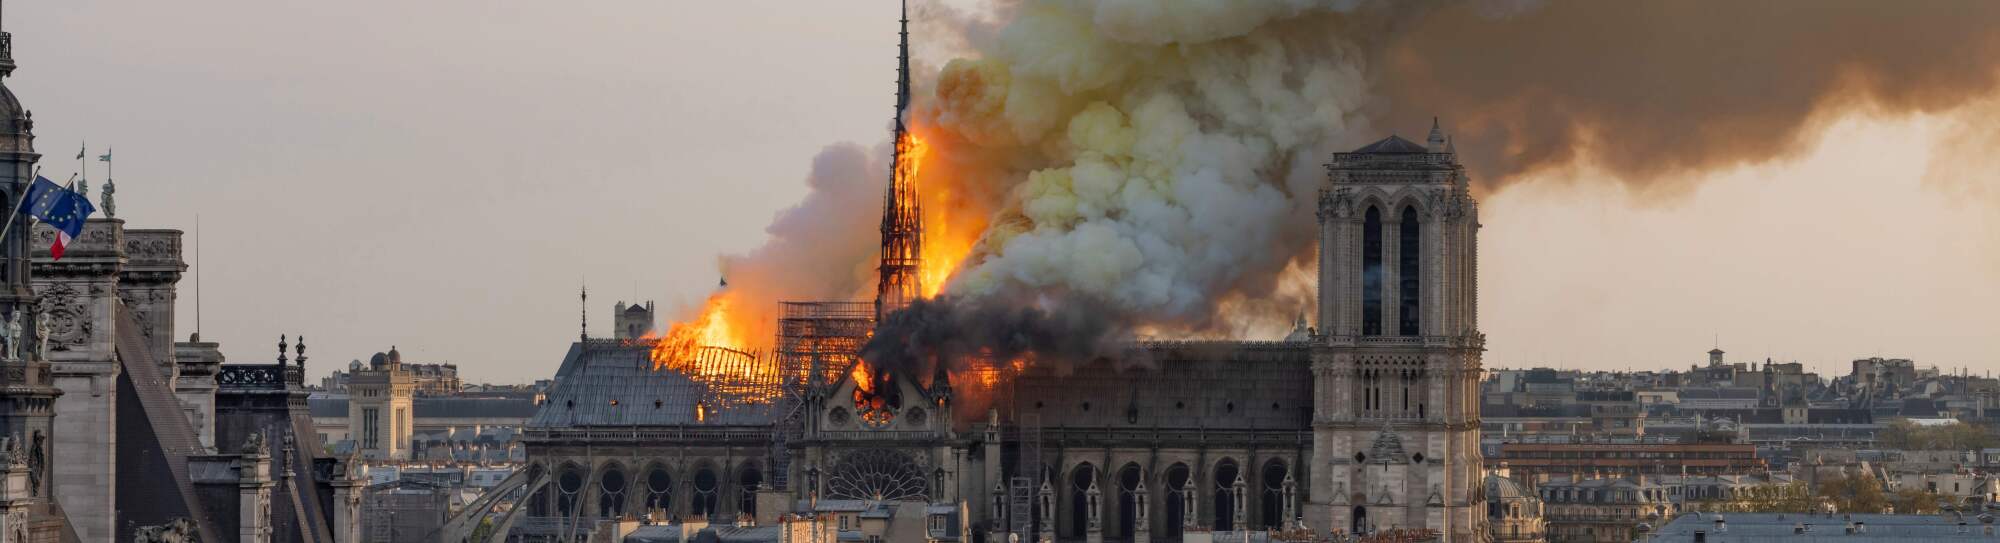 TOPSHOT - Smoke billows as flames burn through the roof of the Notre-Dame de Paris Cathedral on April 15, 2019, in the French capital Paris. - A huge fire swept through the roof of the famed Notre-Dame Cathedral in central Paris on April 15, 2019, sending flames and huge clouds of grey smoke billowing into the sky. The flames and smoke plumed from the spire and roof of the gothic cathedral, visited by millions of people a year. A spokesman for the cathedral told AFP that the wooden structure supporting the roof was being gutted by the blaze. (Photo by Fabien Barrau / AFP) (Photo credit should read FABIEN BARRAU/AFP via Getty Images)